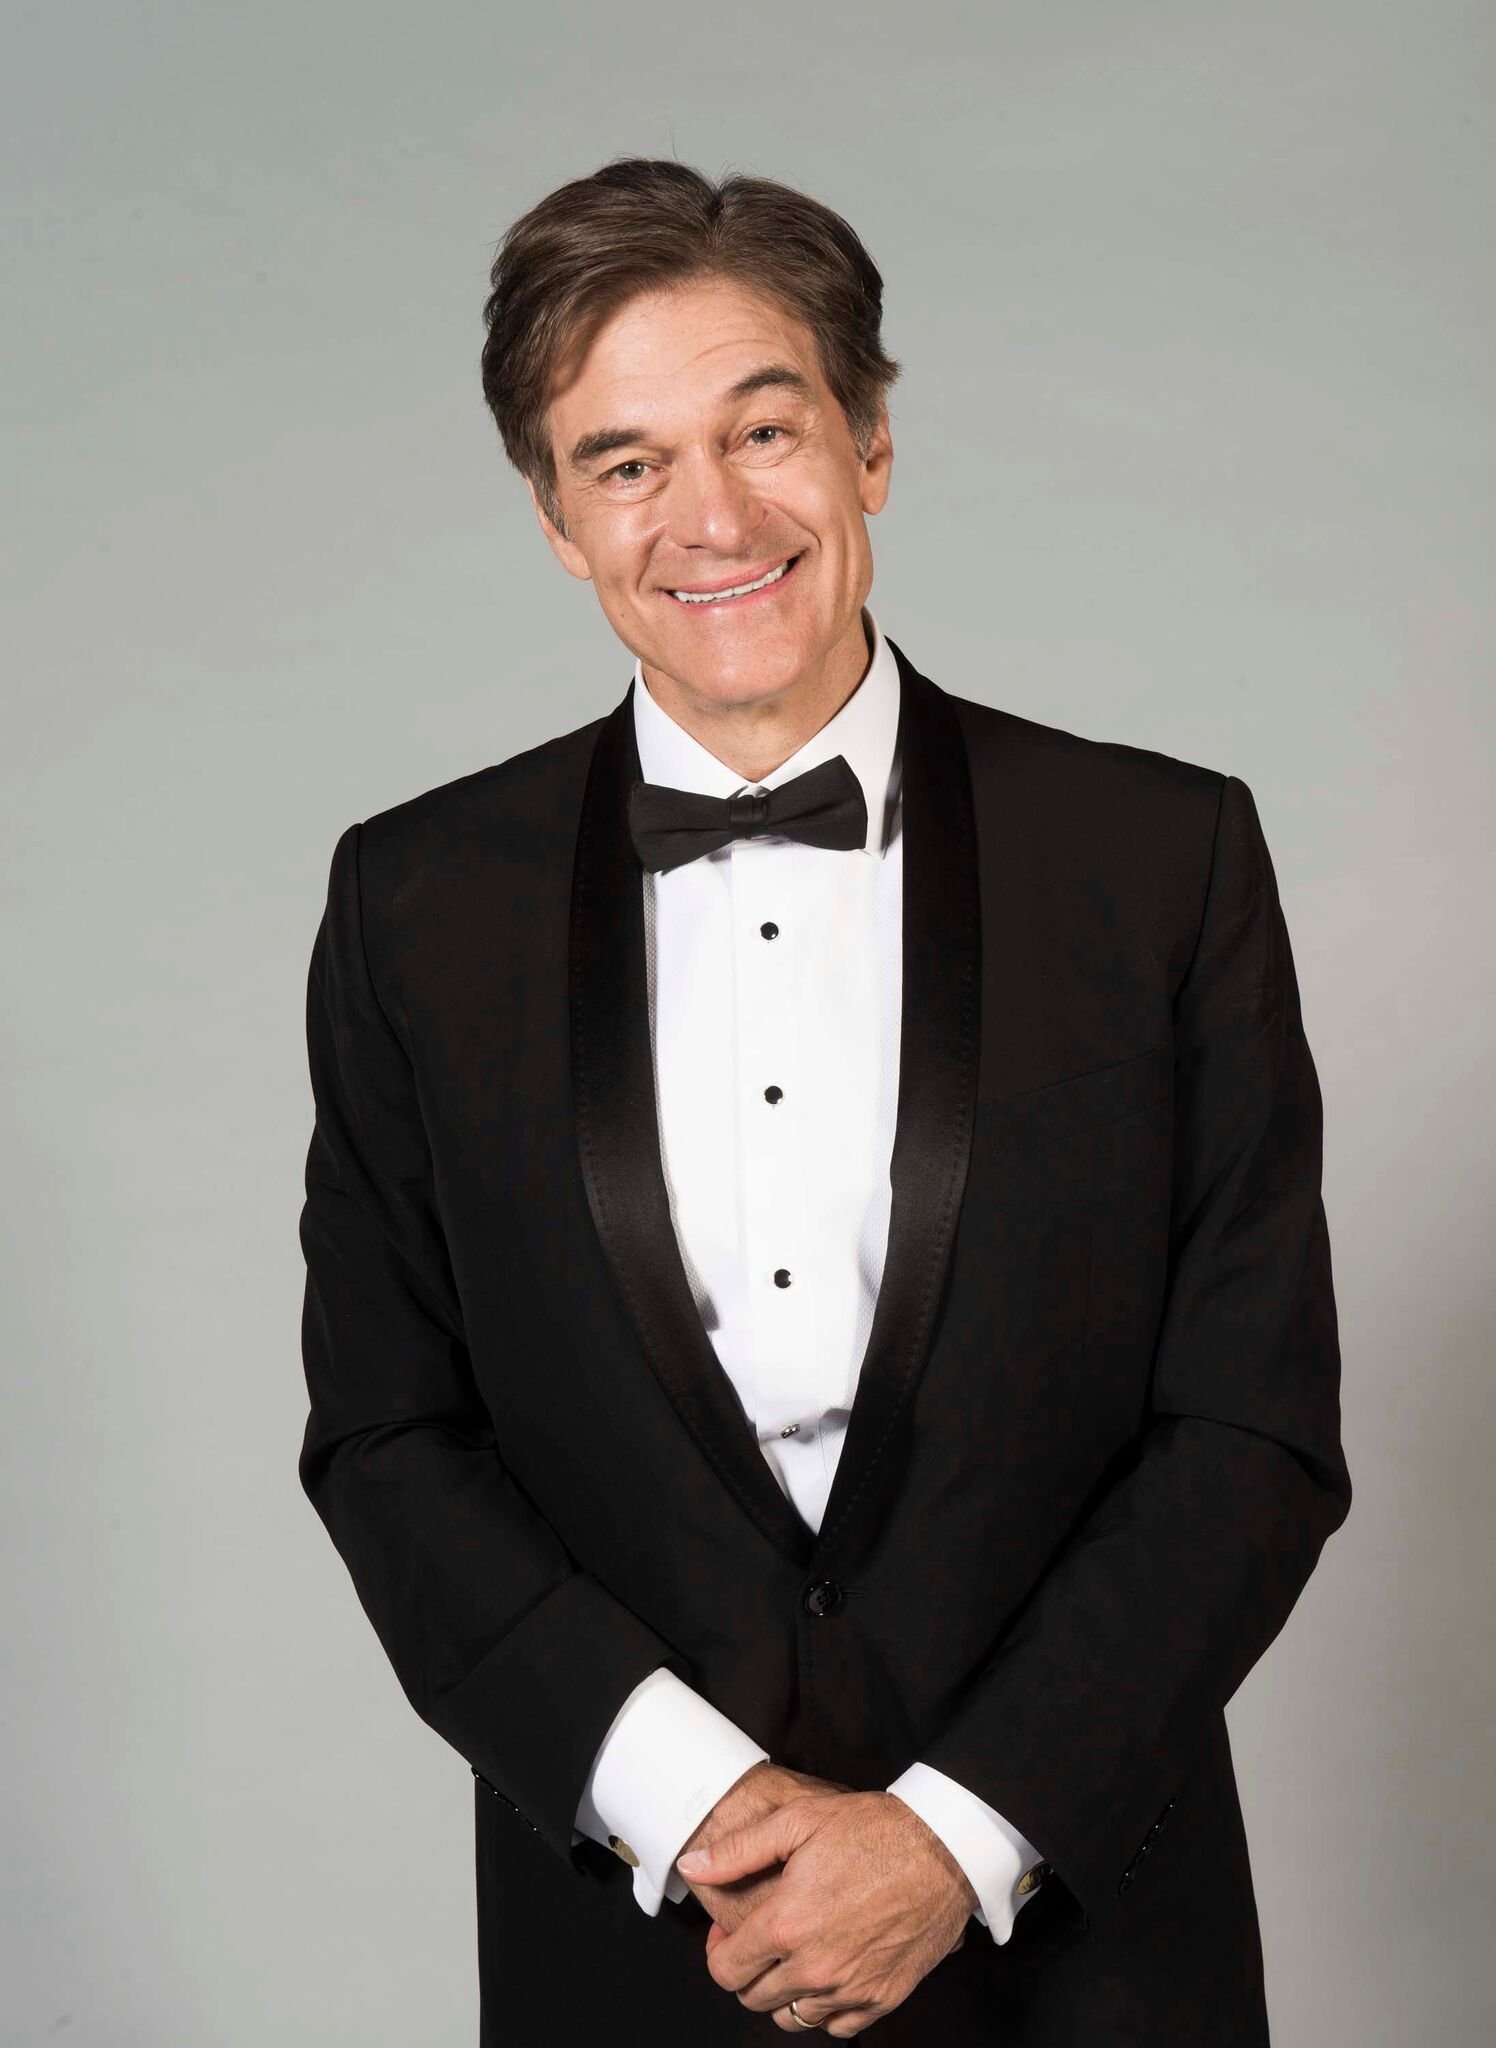 Dr. Oz poses for portrait at 45th Daytime Emmy Awards - Portraits by The Artists Project Sponsored by the Visual Snow Initiative | Getty Images